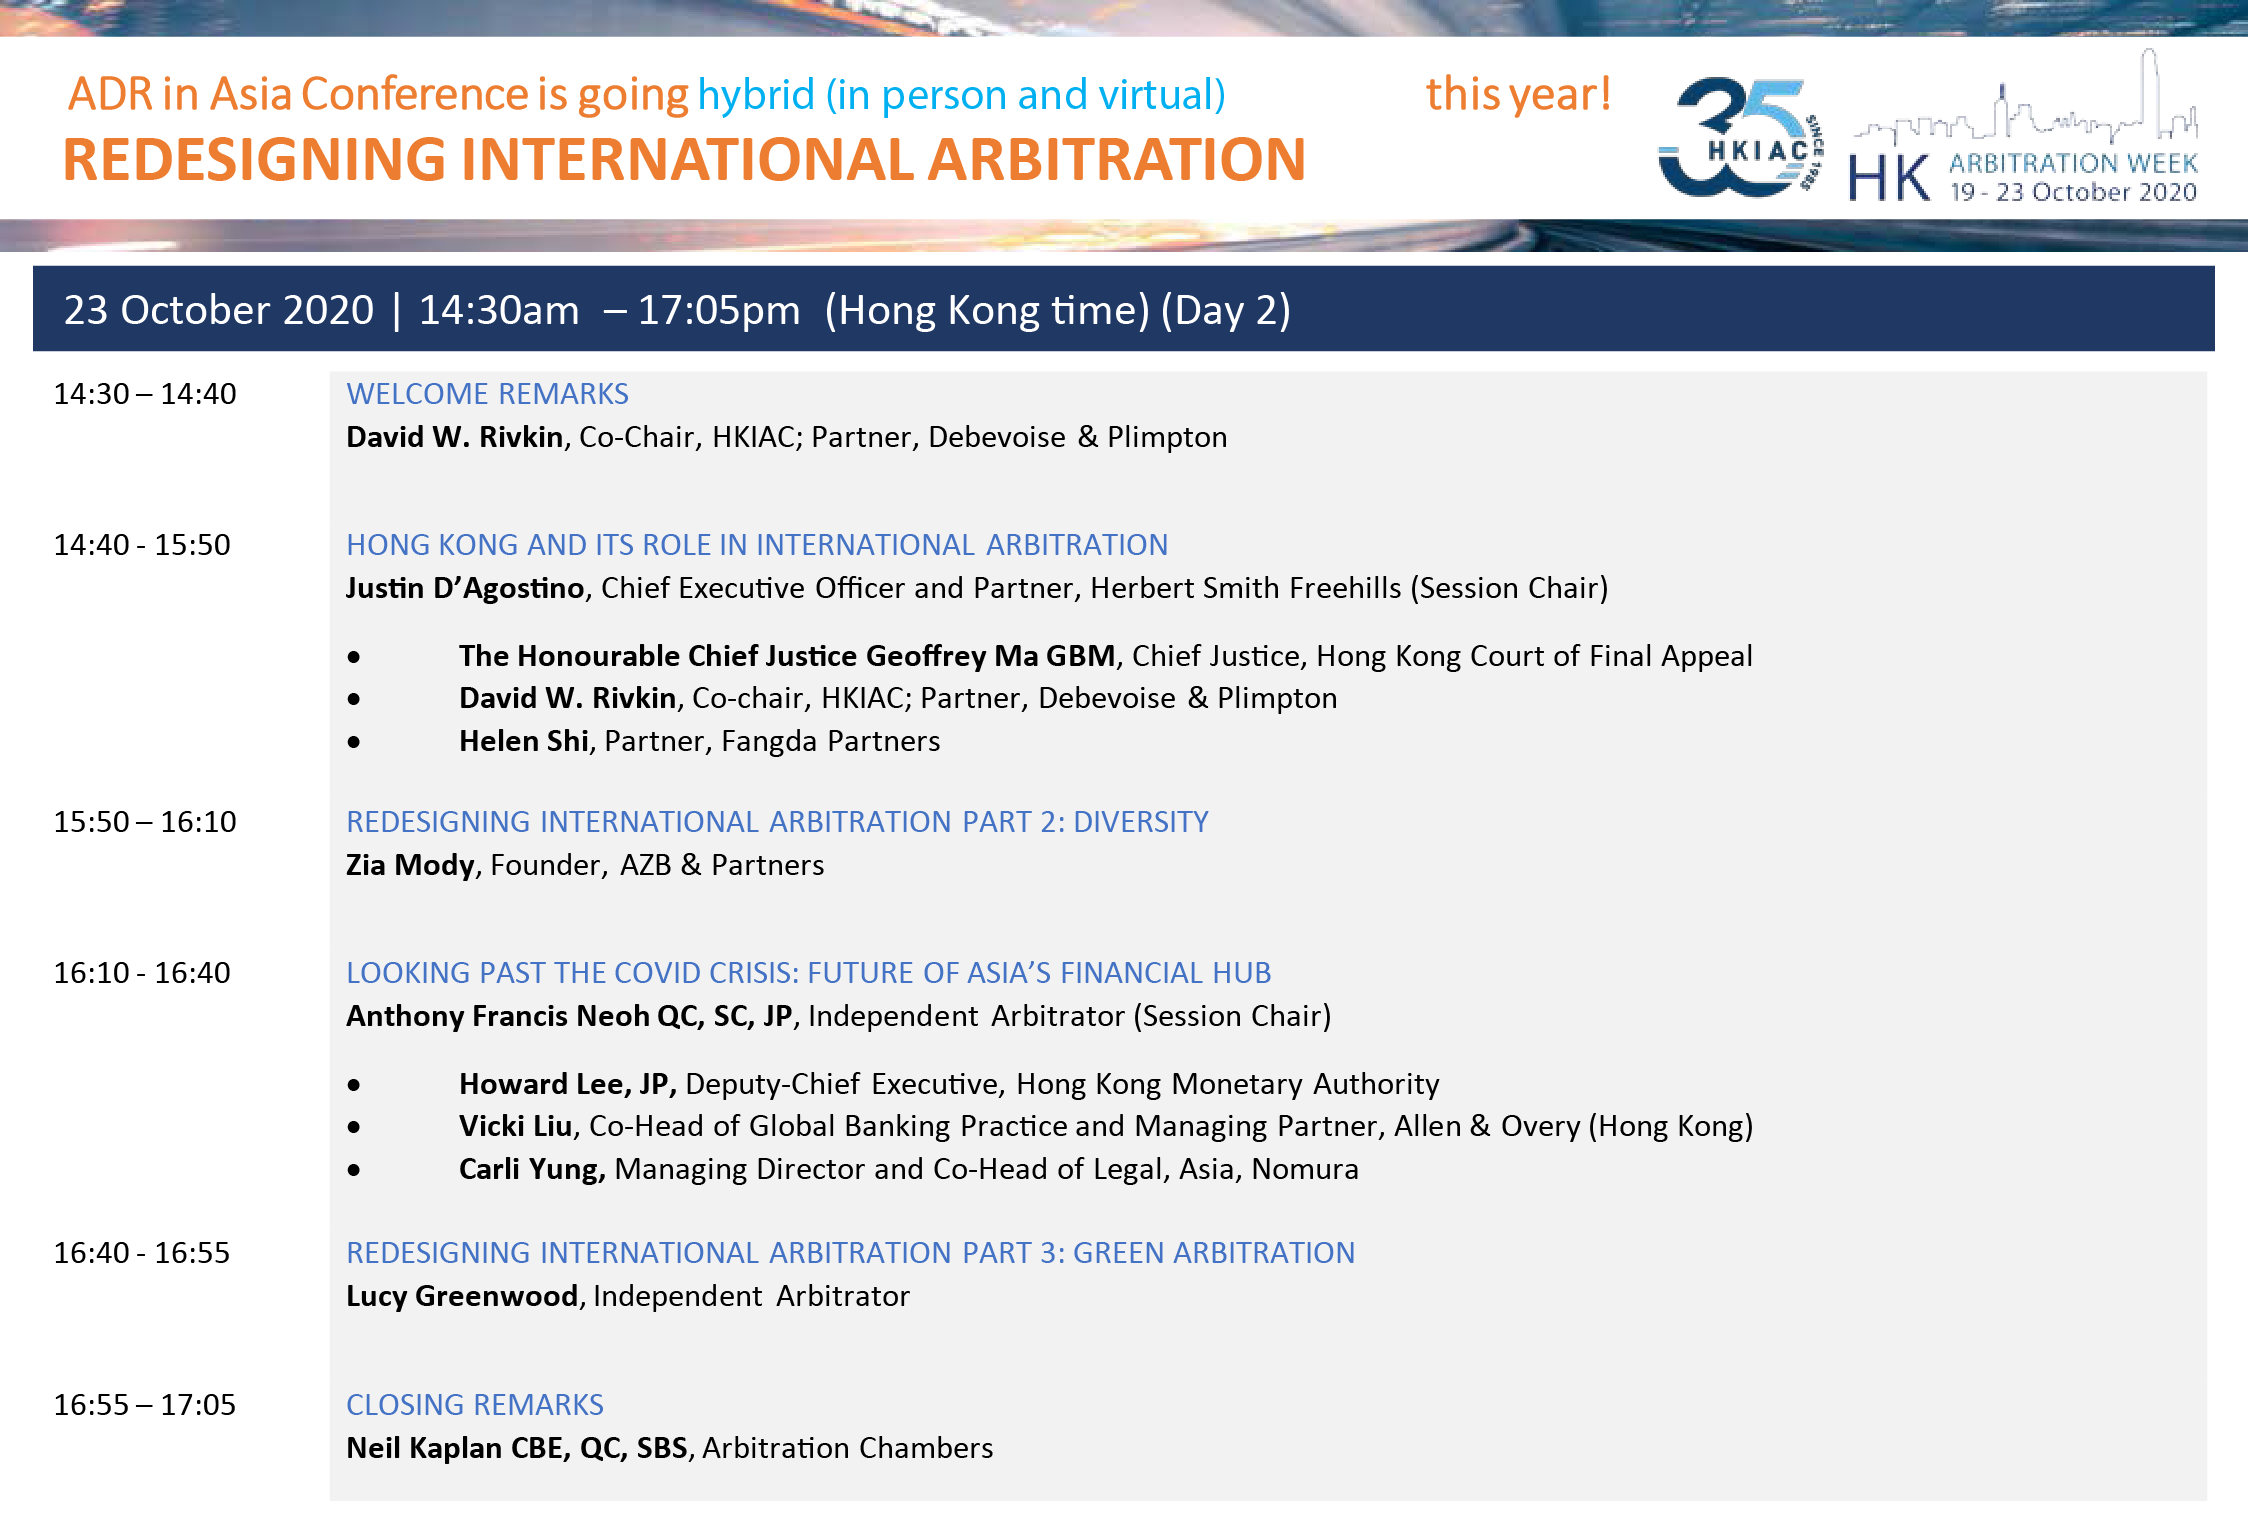 ADR in Asia Conference: Redesigning International Arbitration (Day 1 & 2)